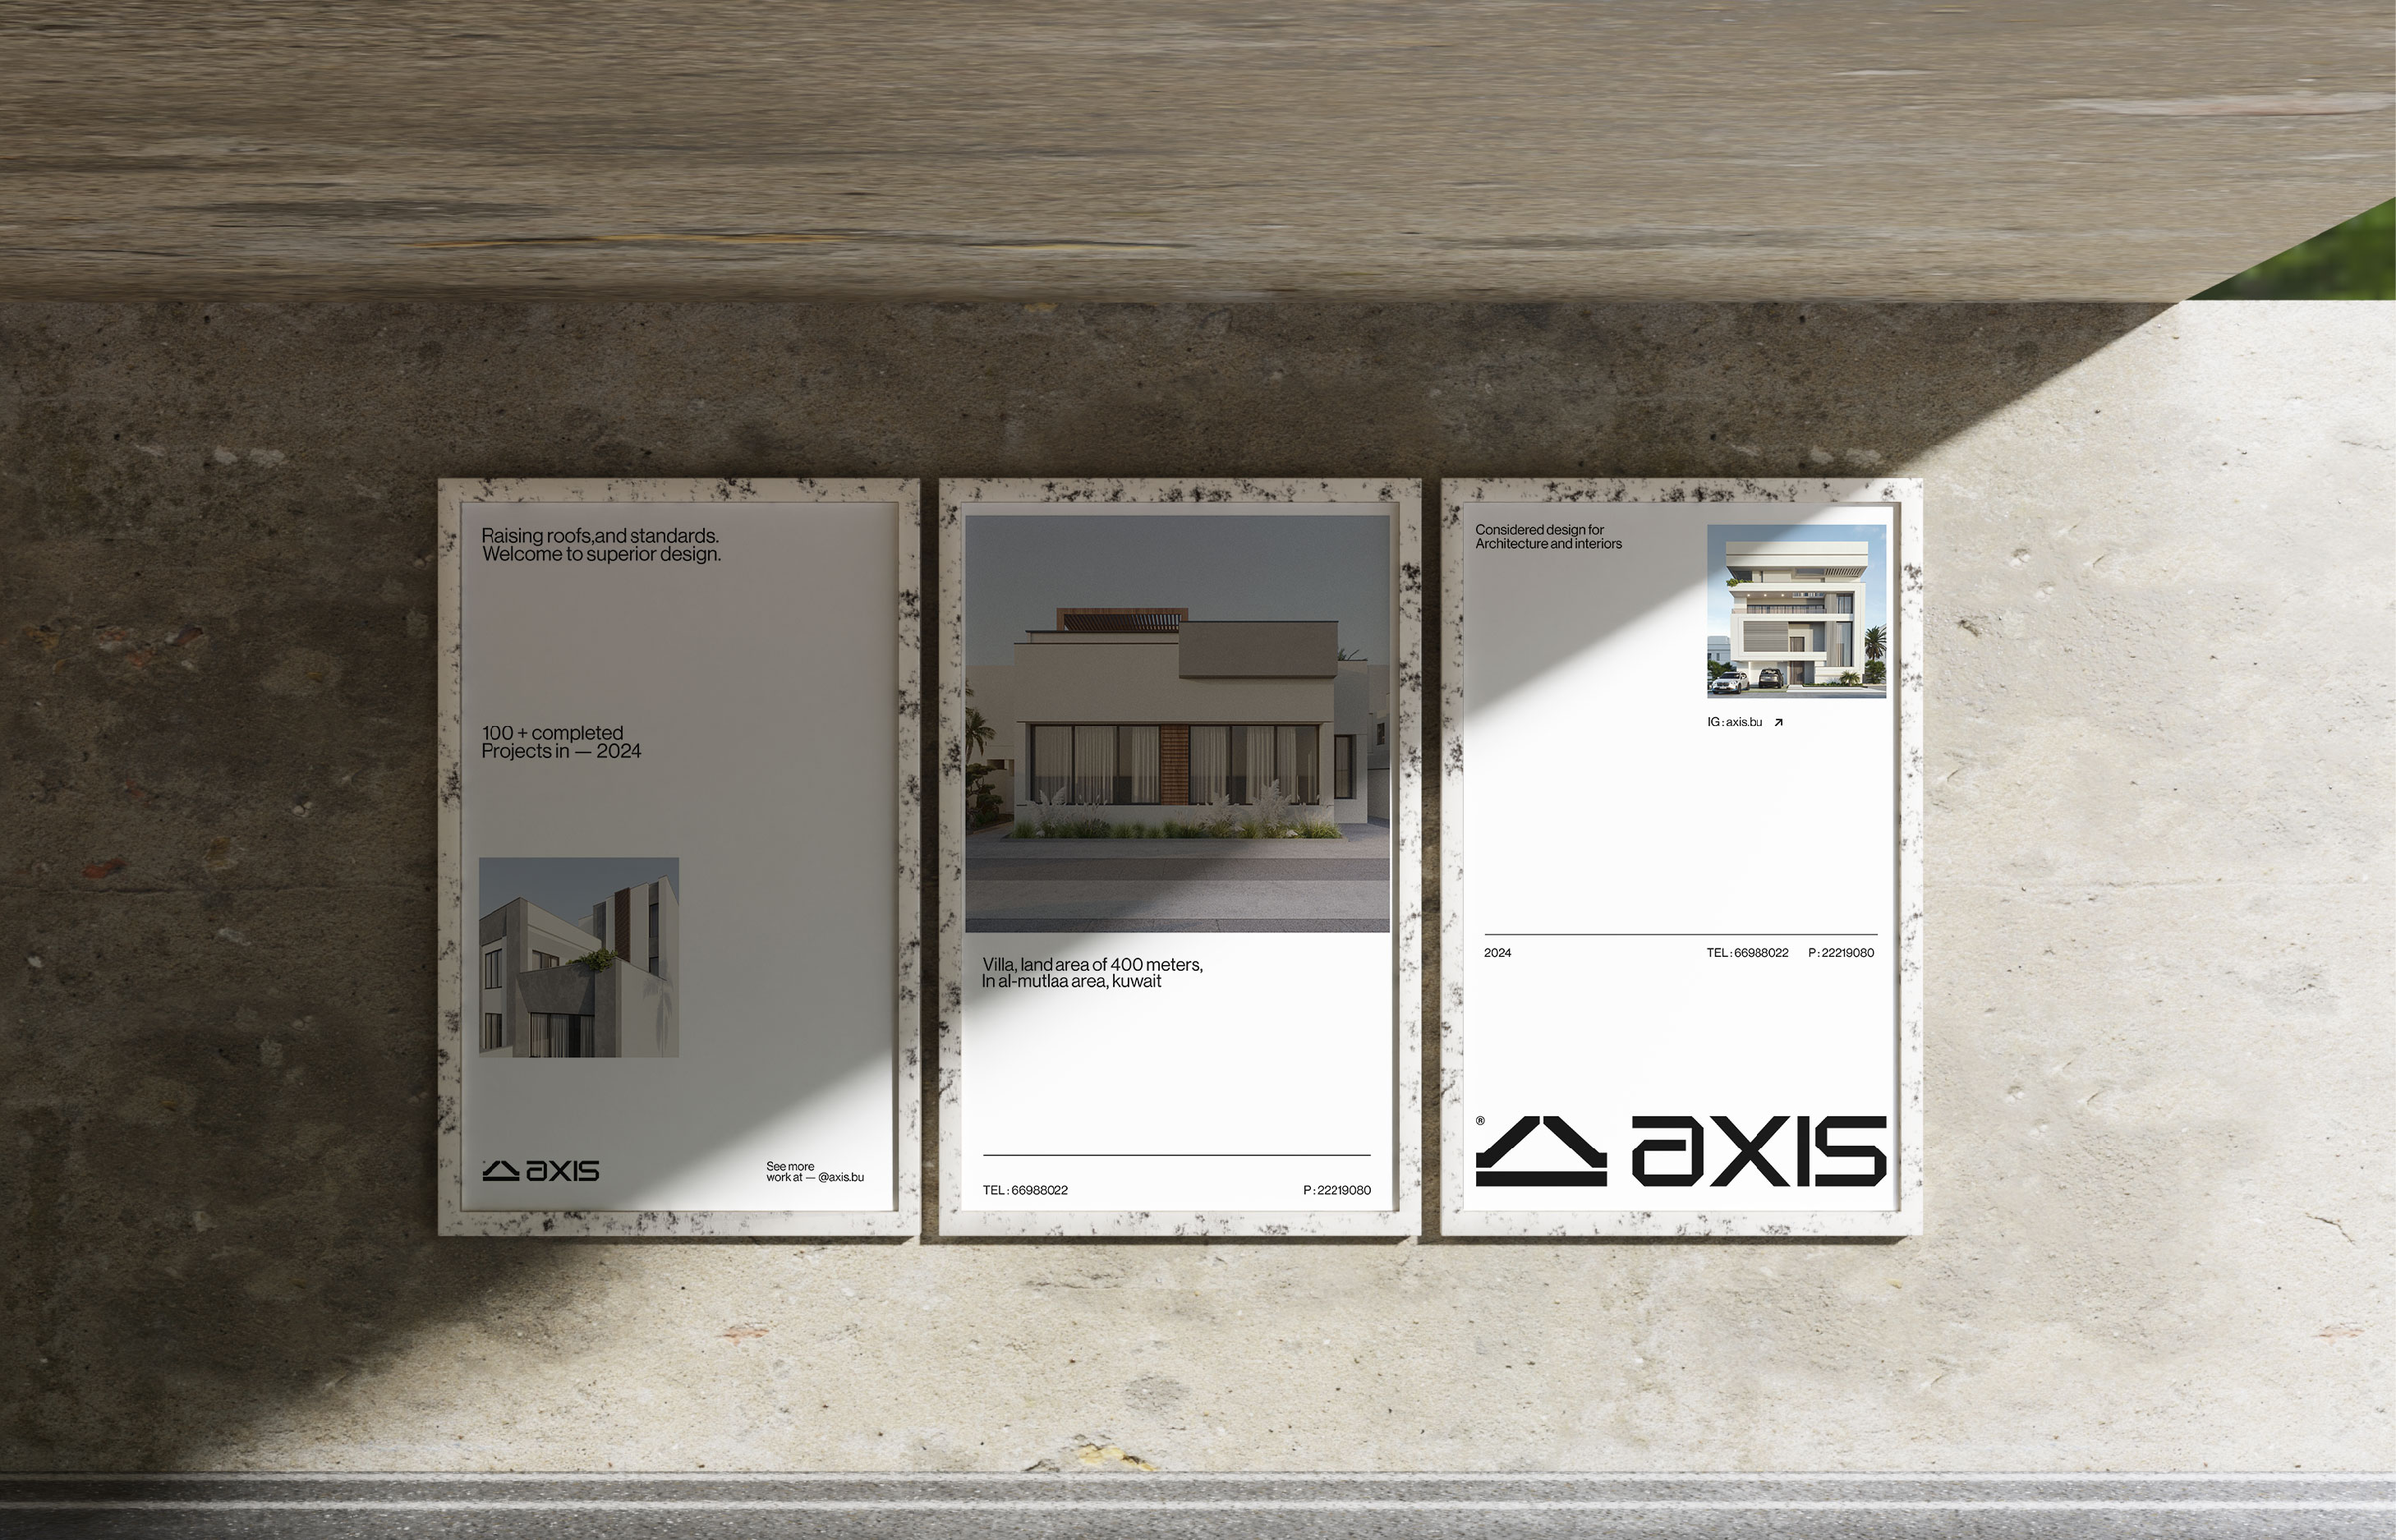 Safa Khamis Creates Branding for Axis Design and Architecture Firm